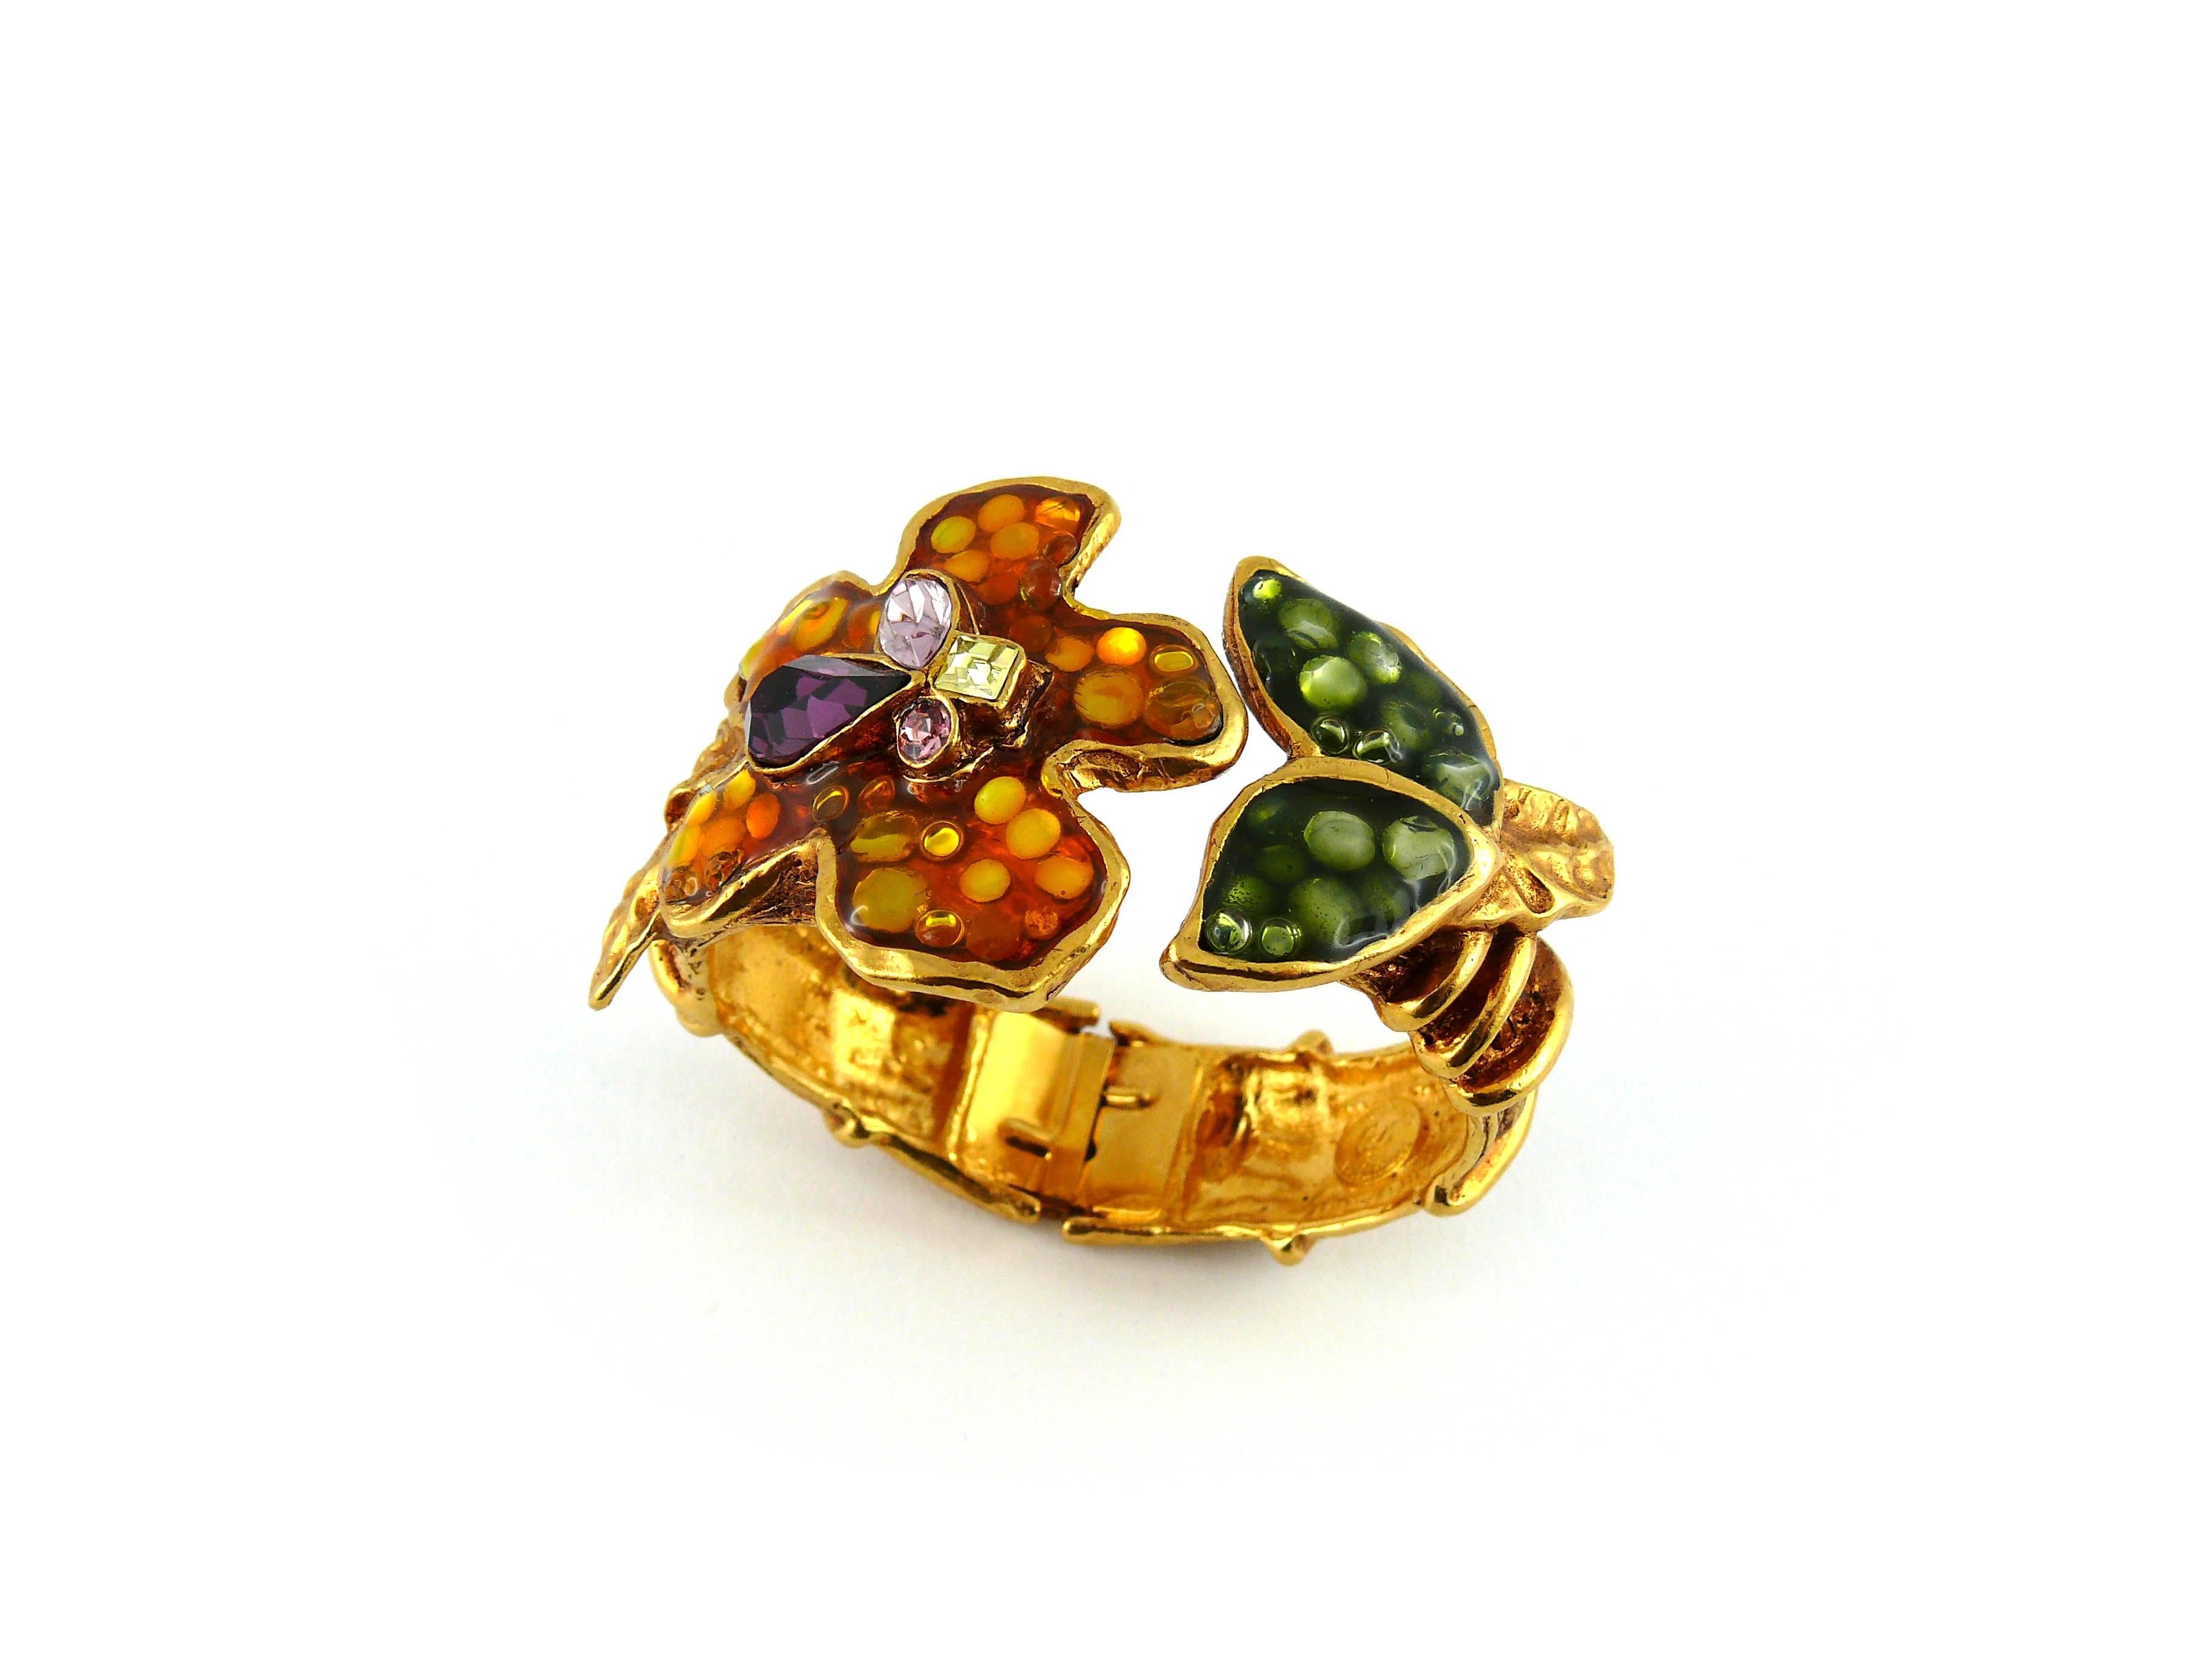 CHRISTIAN LACROIX vintage enamel floral clamper bracelet with rhinestone embellishement in a gold tone setting.

Marked CHRISTIAN LACROIX CL Made in France.

Indicative measurements : total diameter approx. 6.4 cm (2.52 inches) / inner diameter